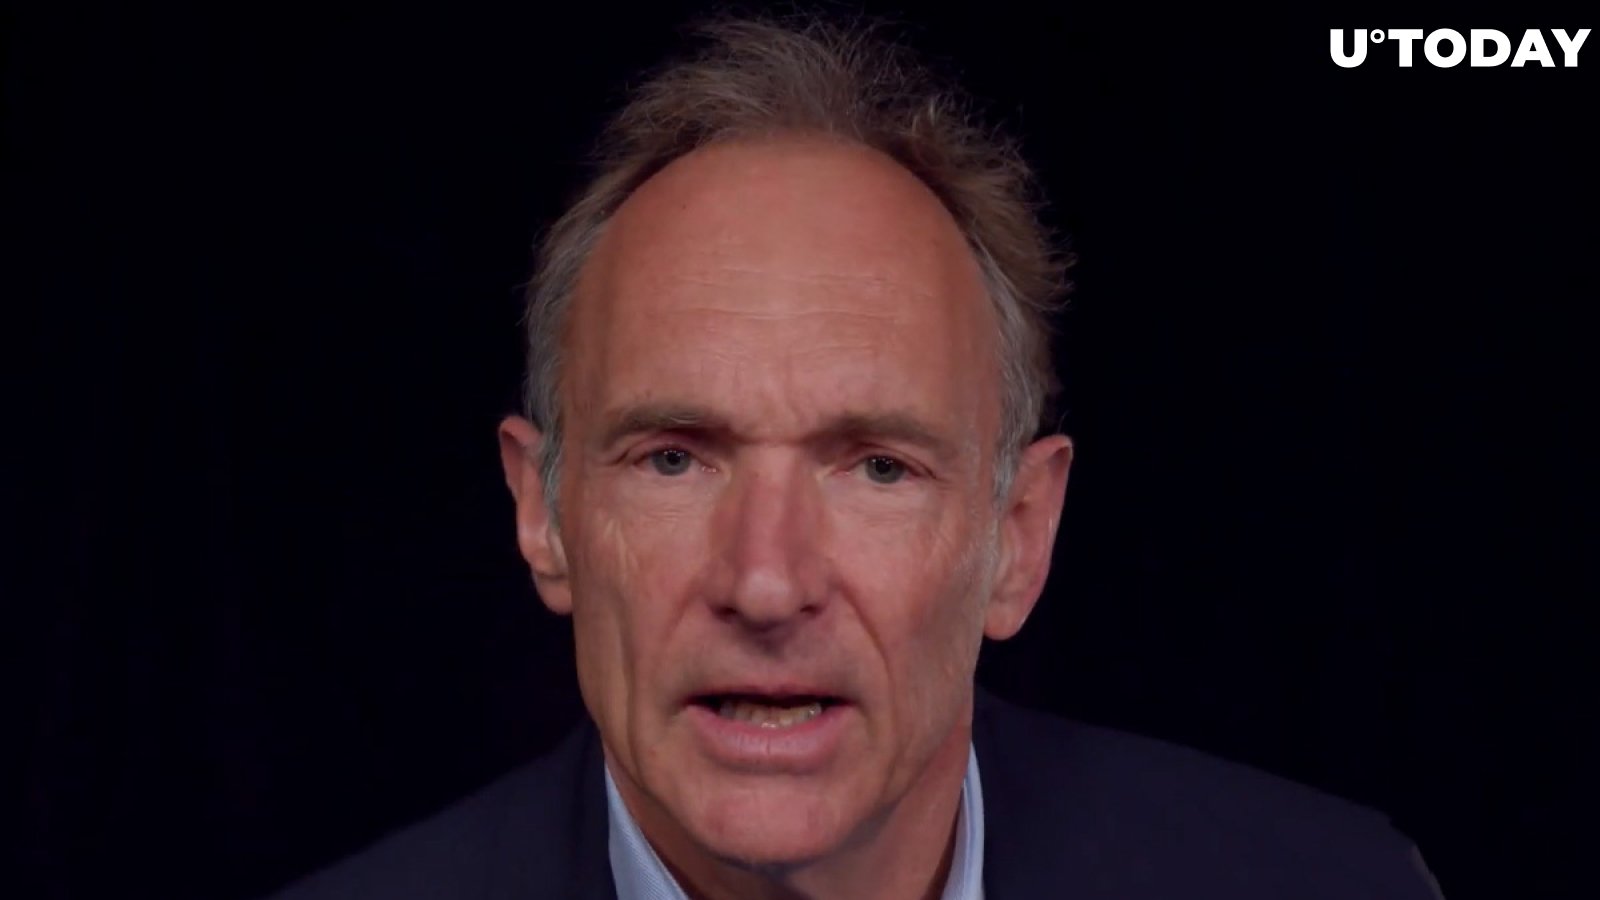 “Internet Father” Tim Berners-Lee Auctions Web Source Code for $3 Million as NFT